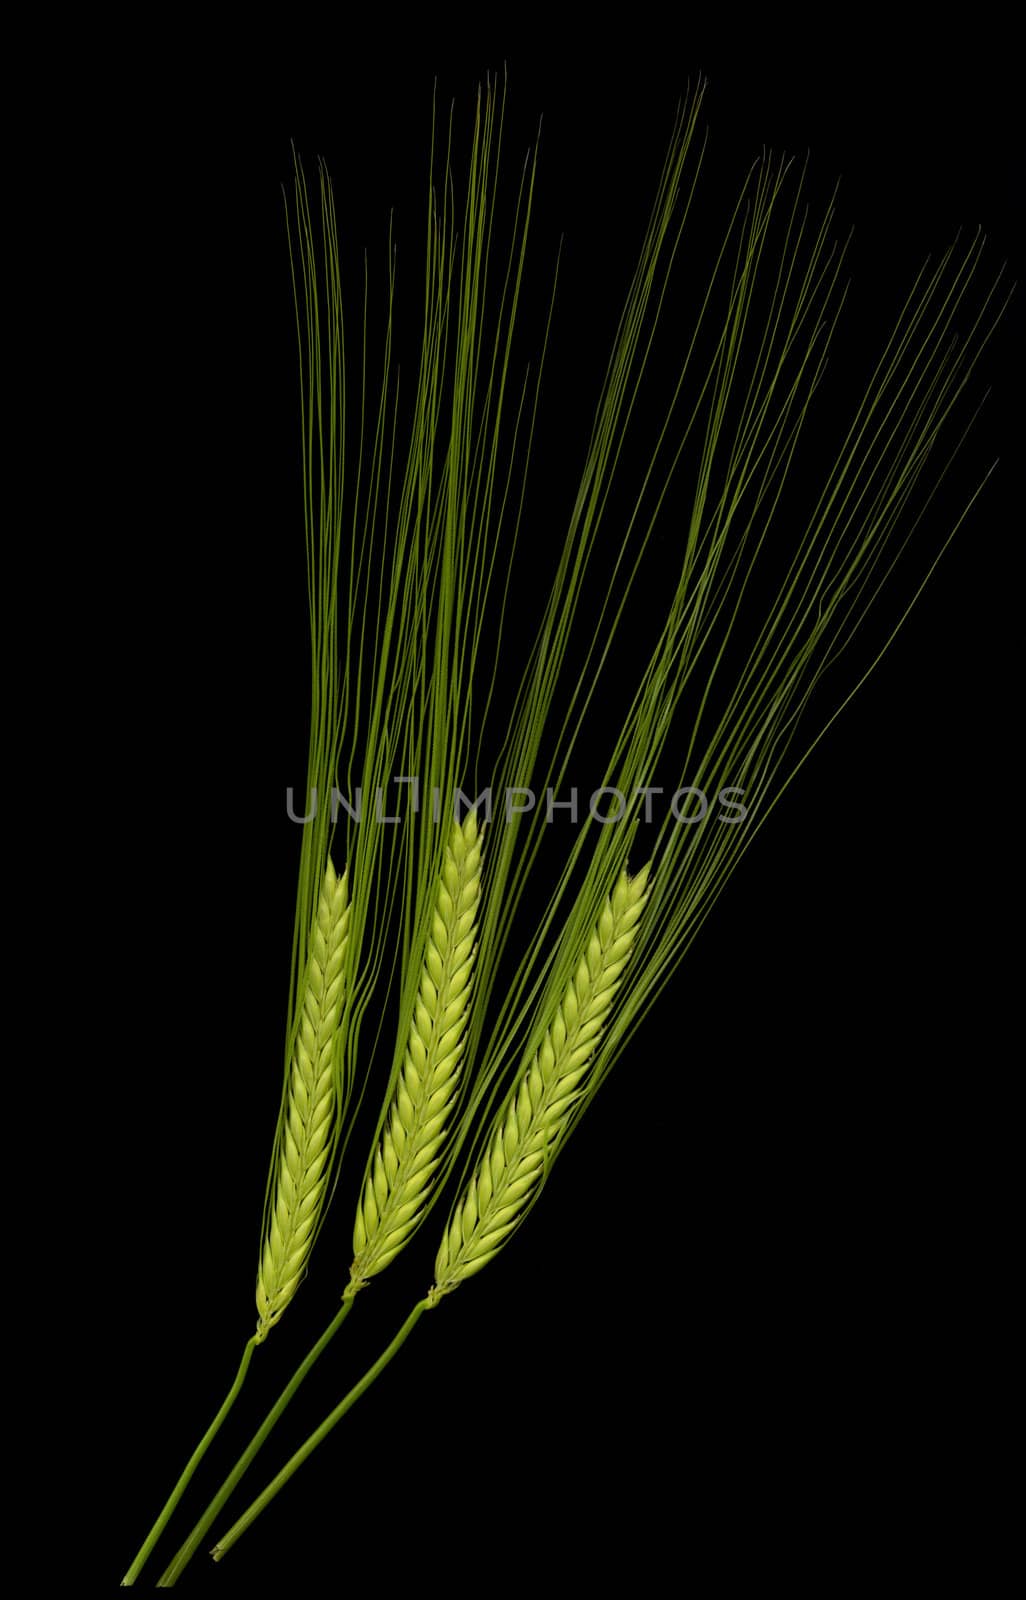 High definition picture of three green durum wheat ears isolated on black